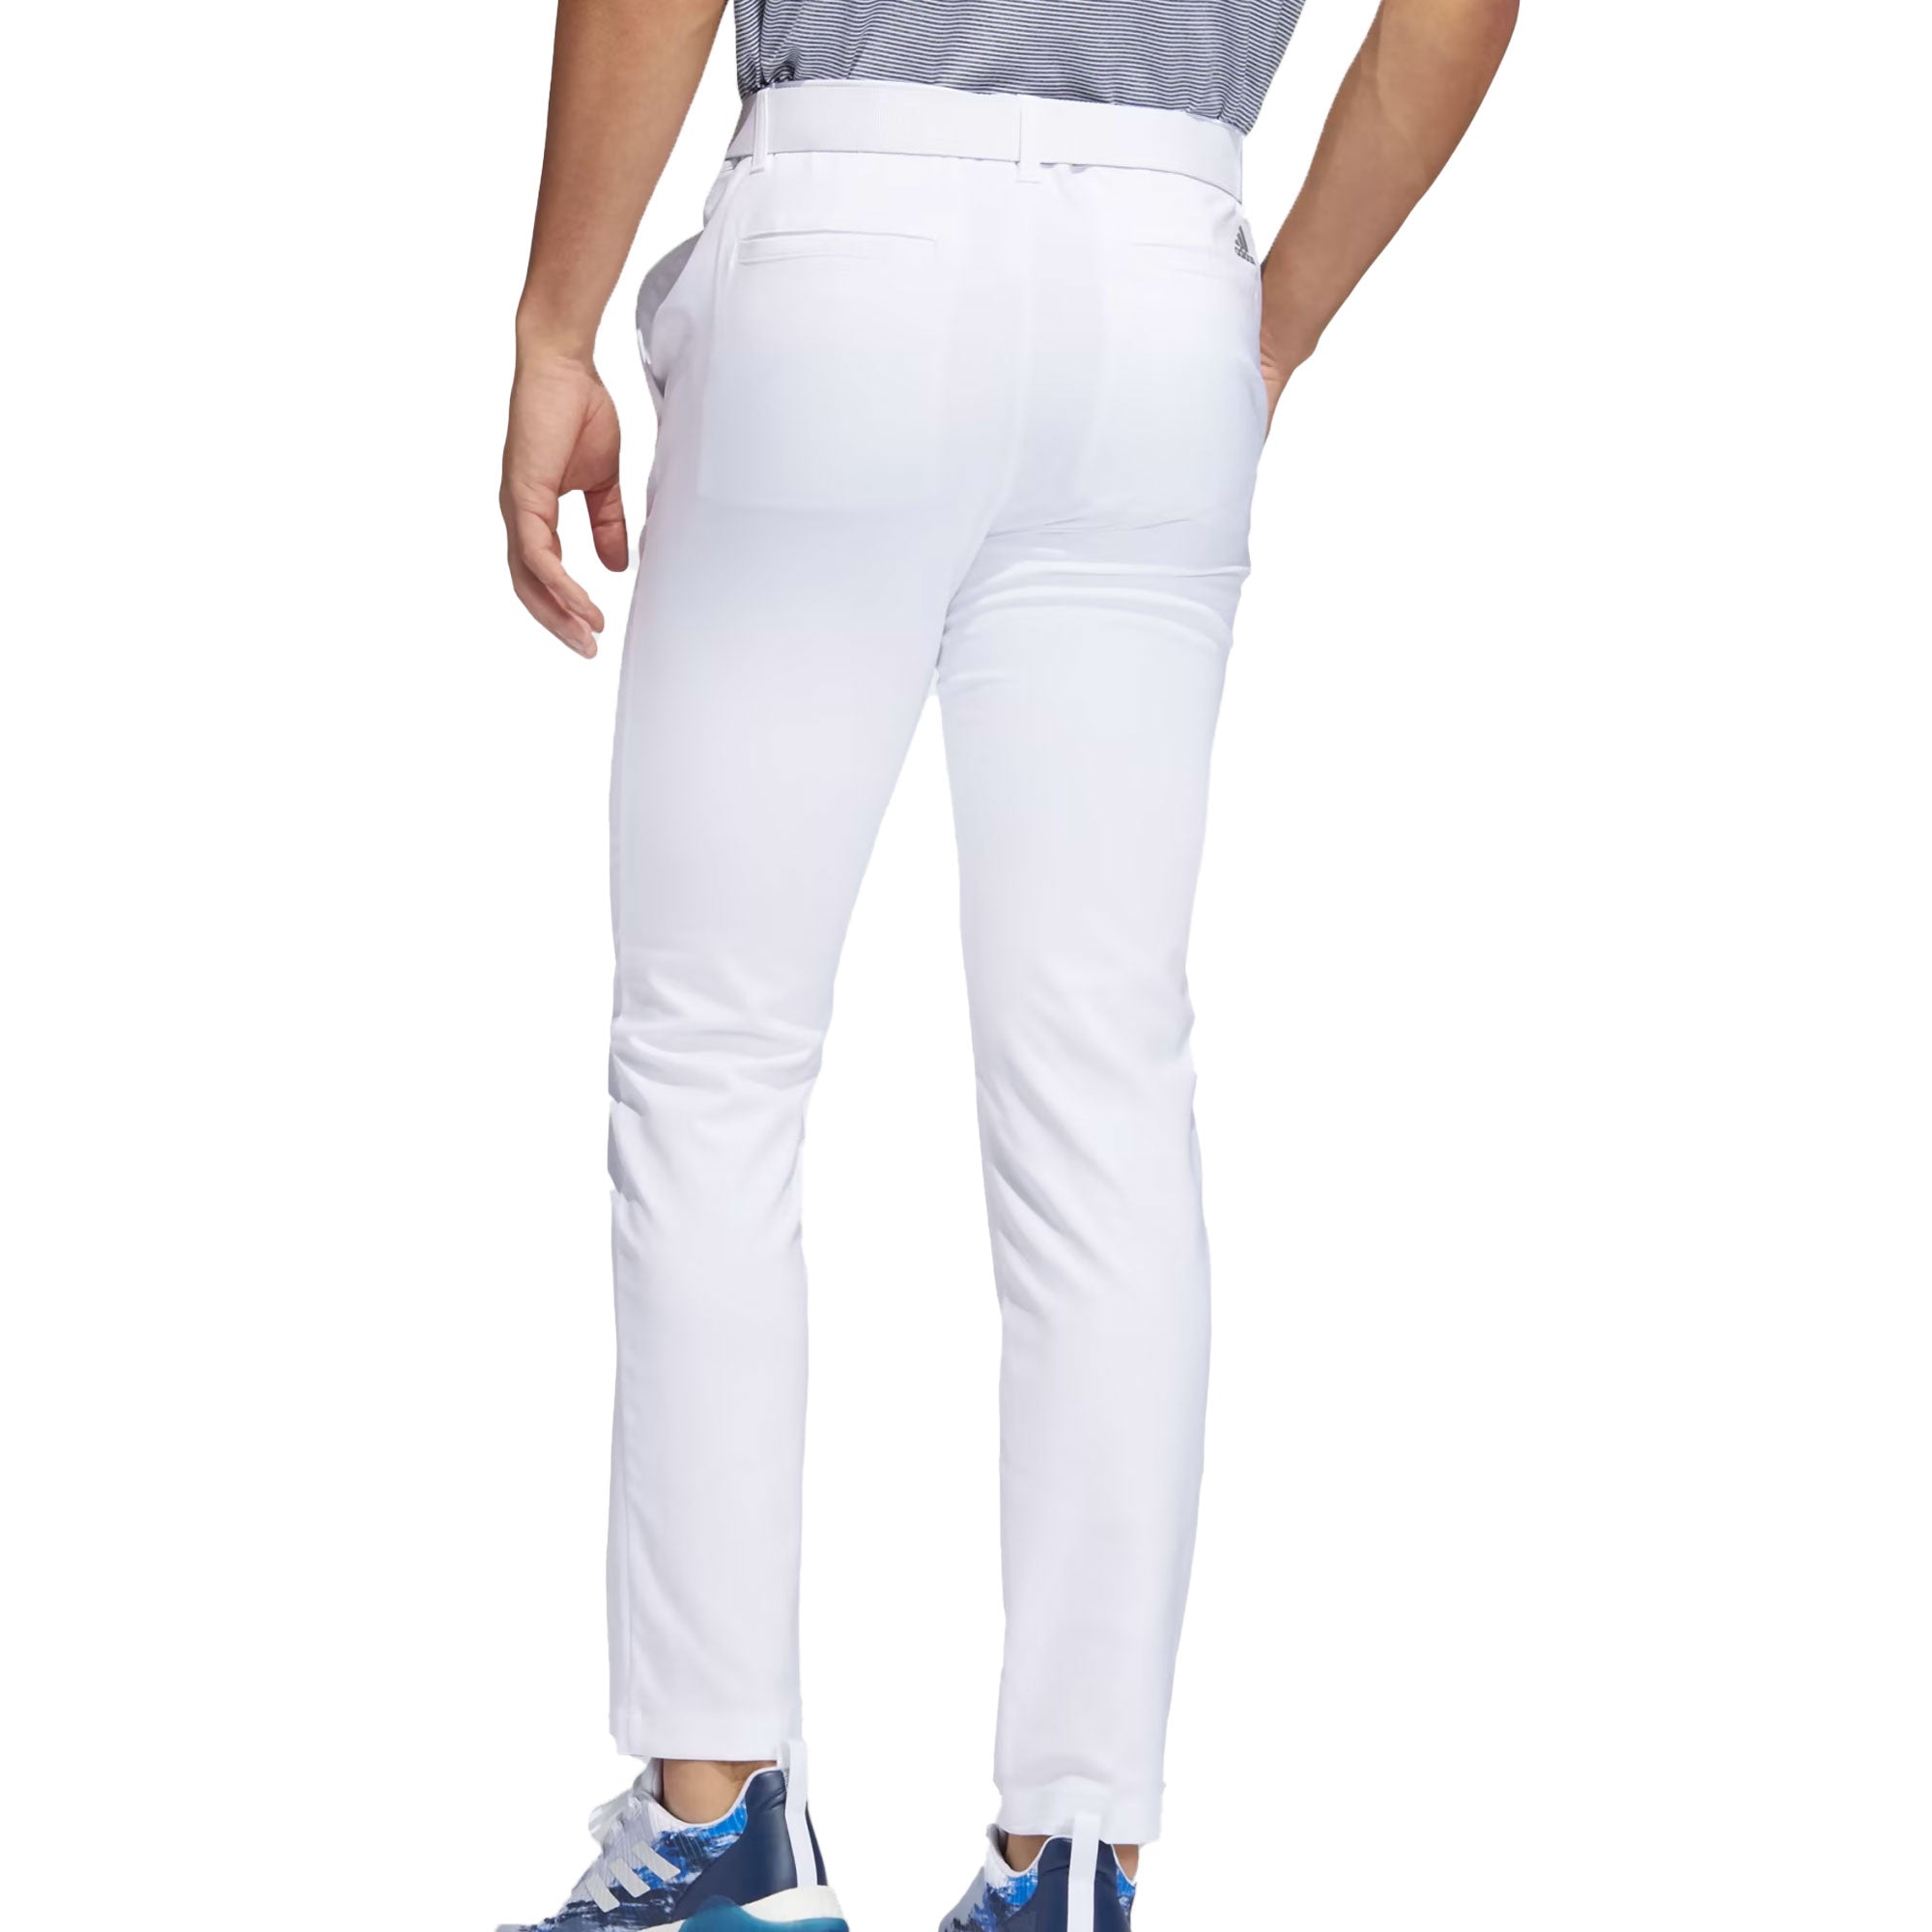 Golf - Clothing - Trousers and Shorts - Page 1 - The Sports HQ